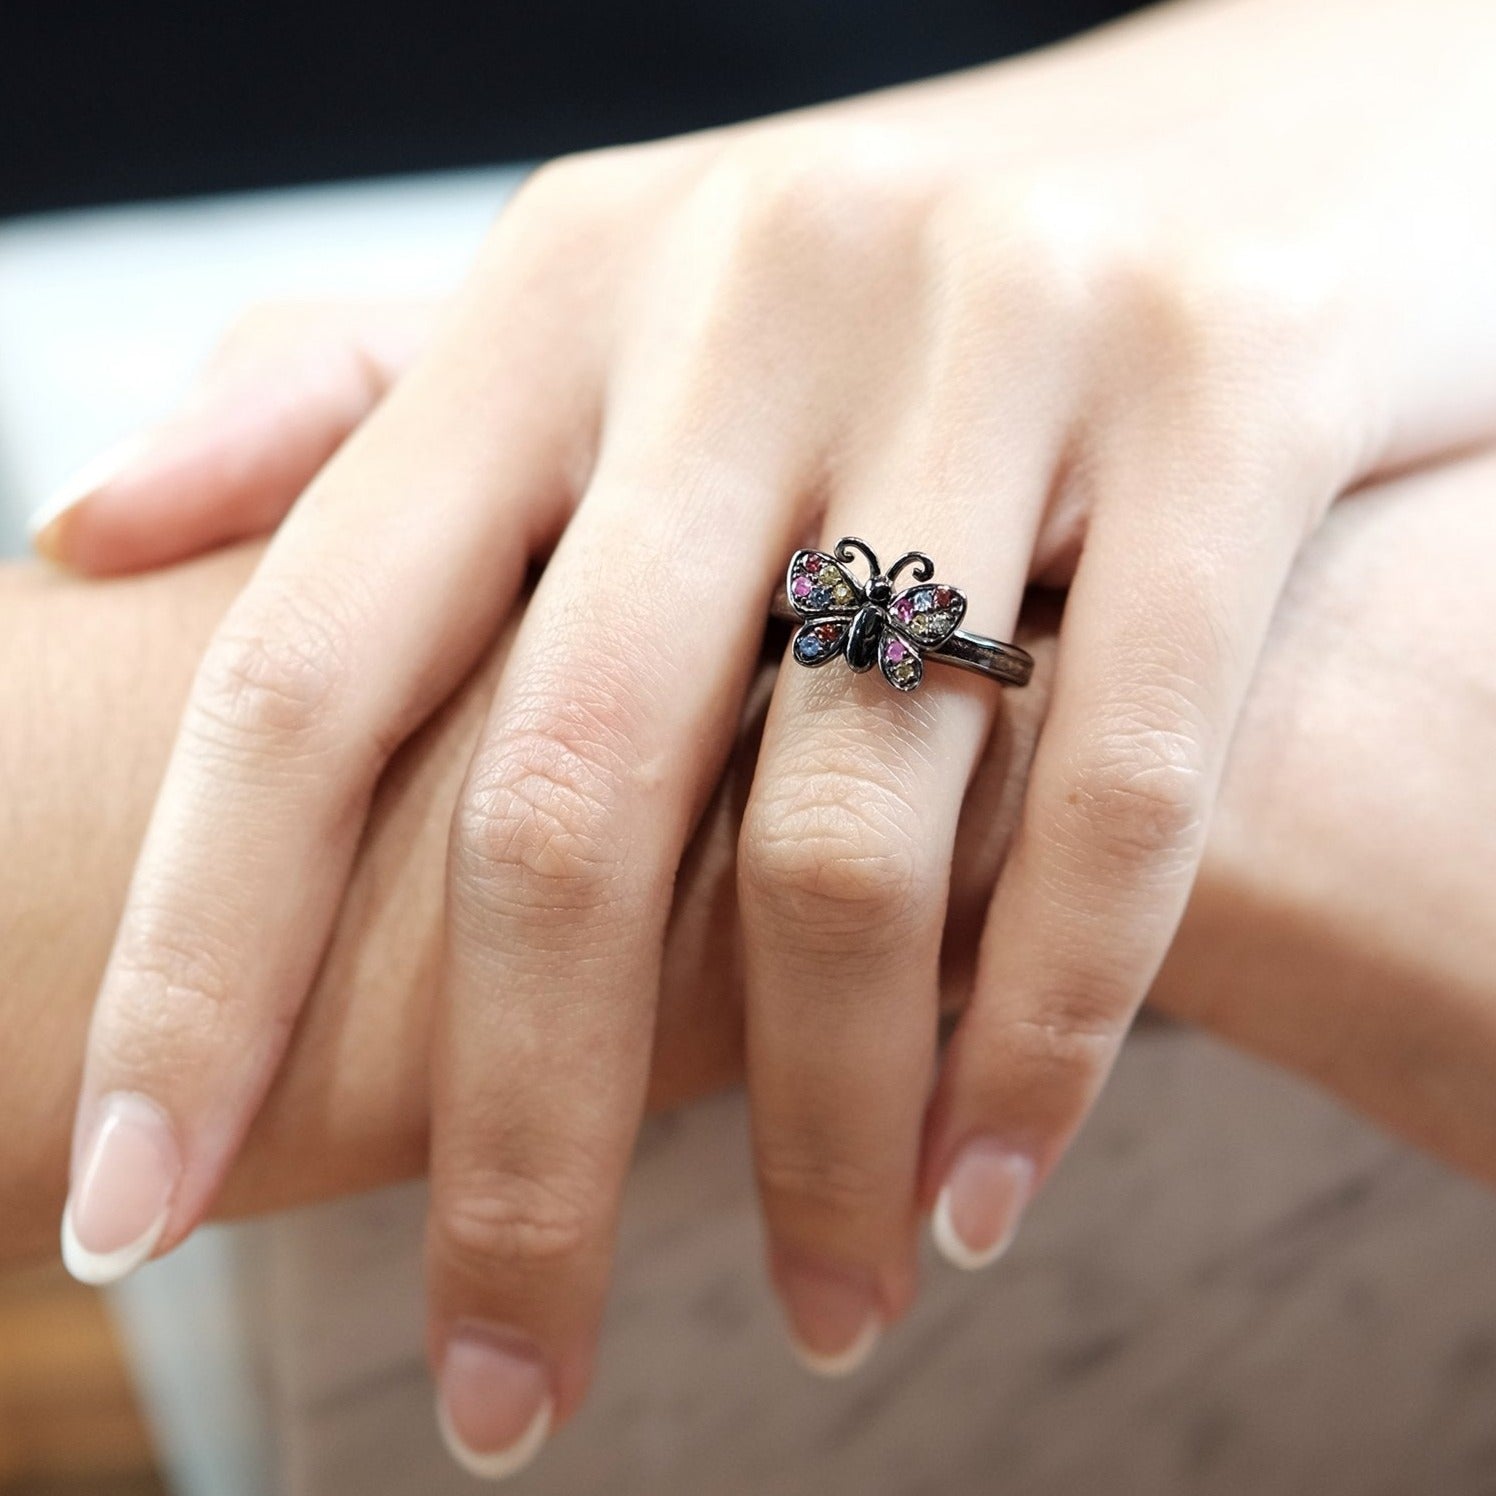 MCL Design butterfly ring